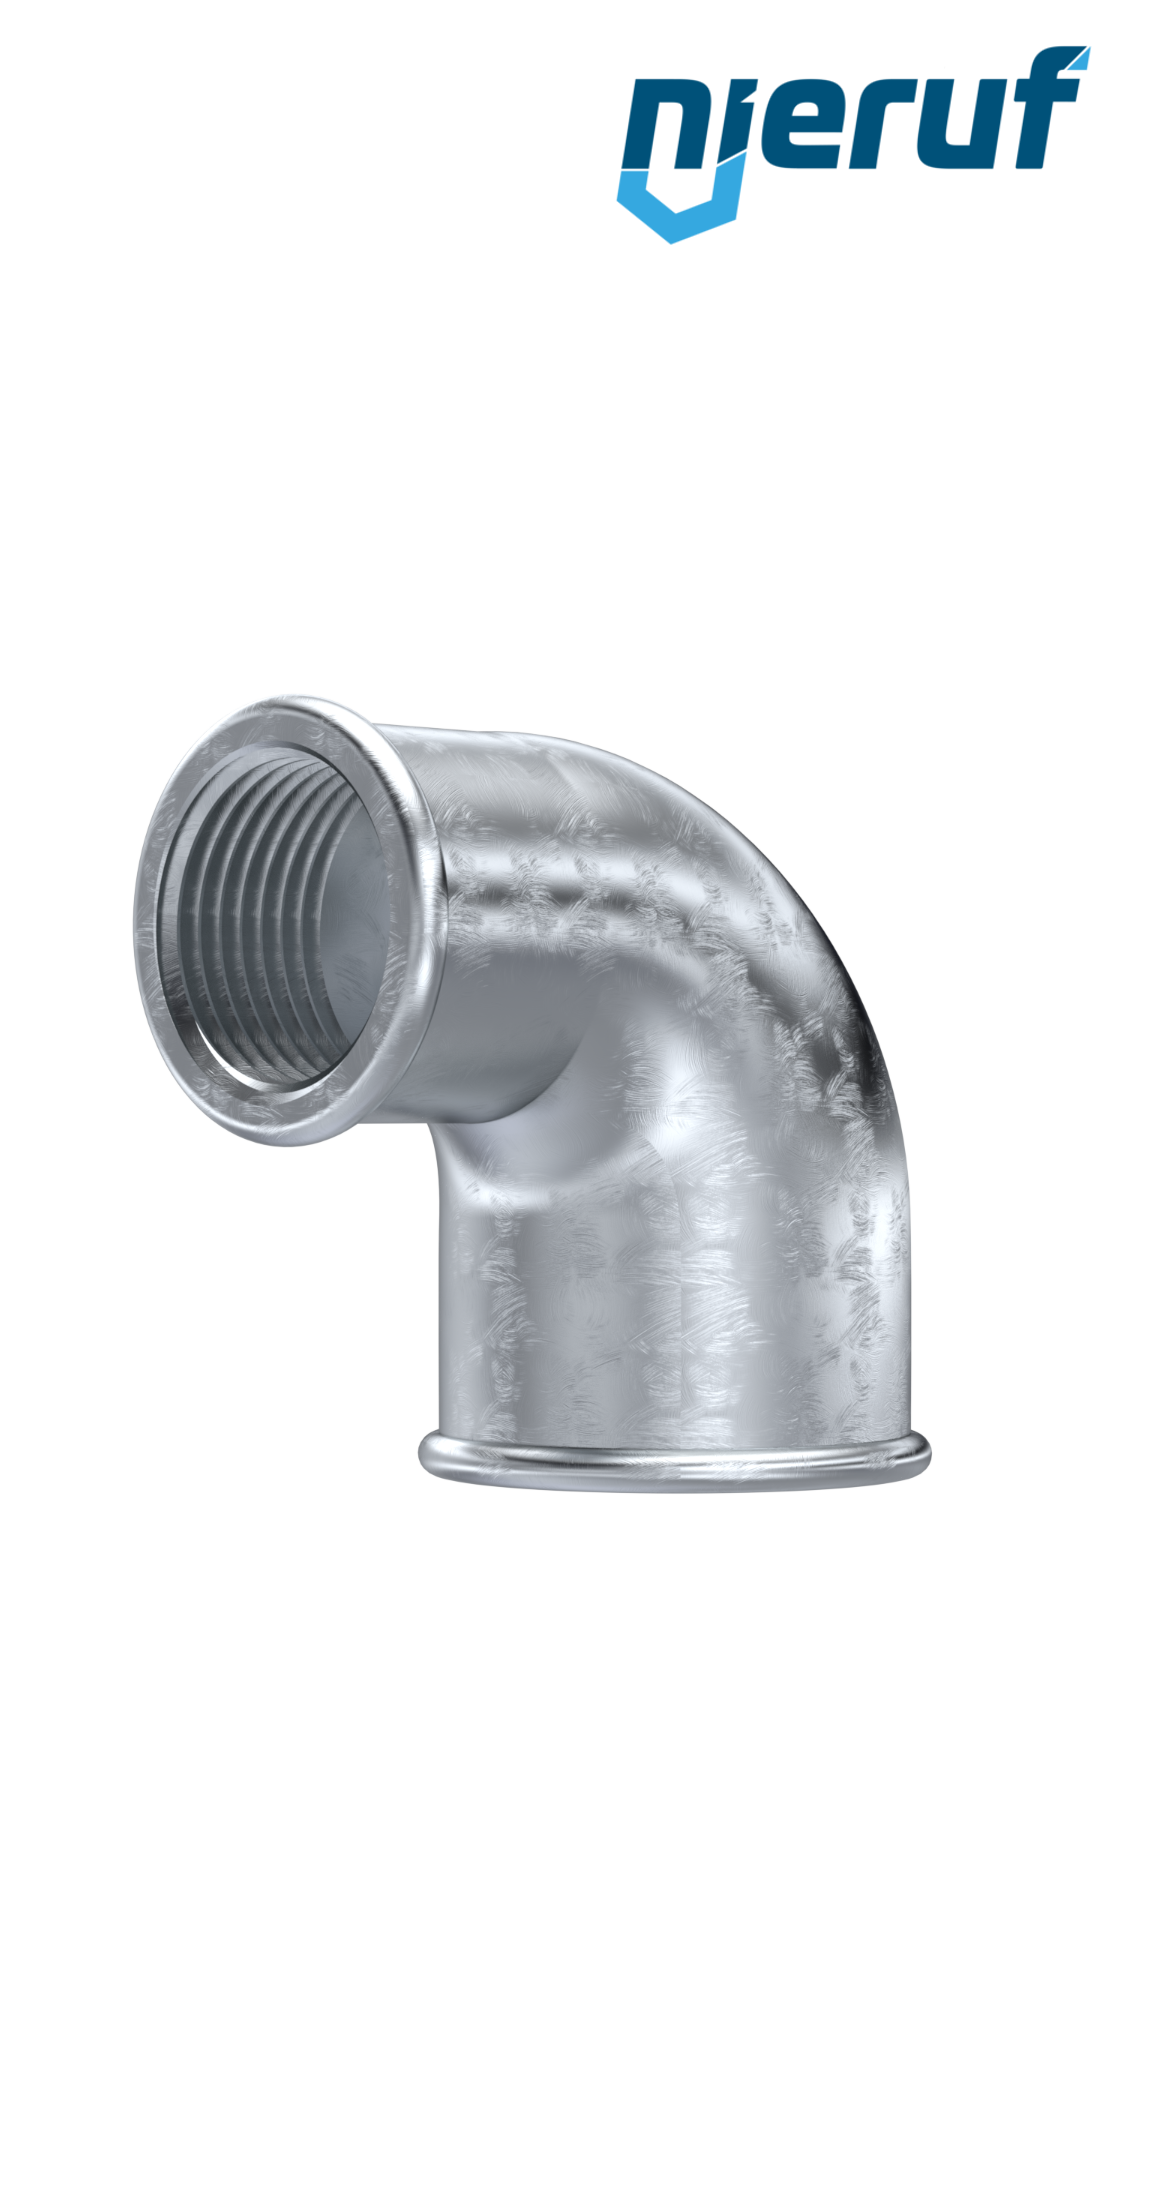 Malleable cast iron fitting elbow reduced no. 90, 2" x 1 1/2" inch galvanized